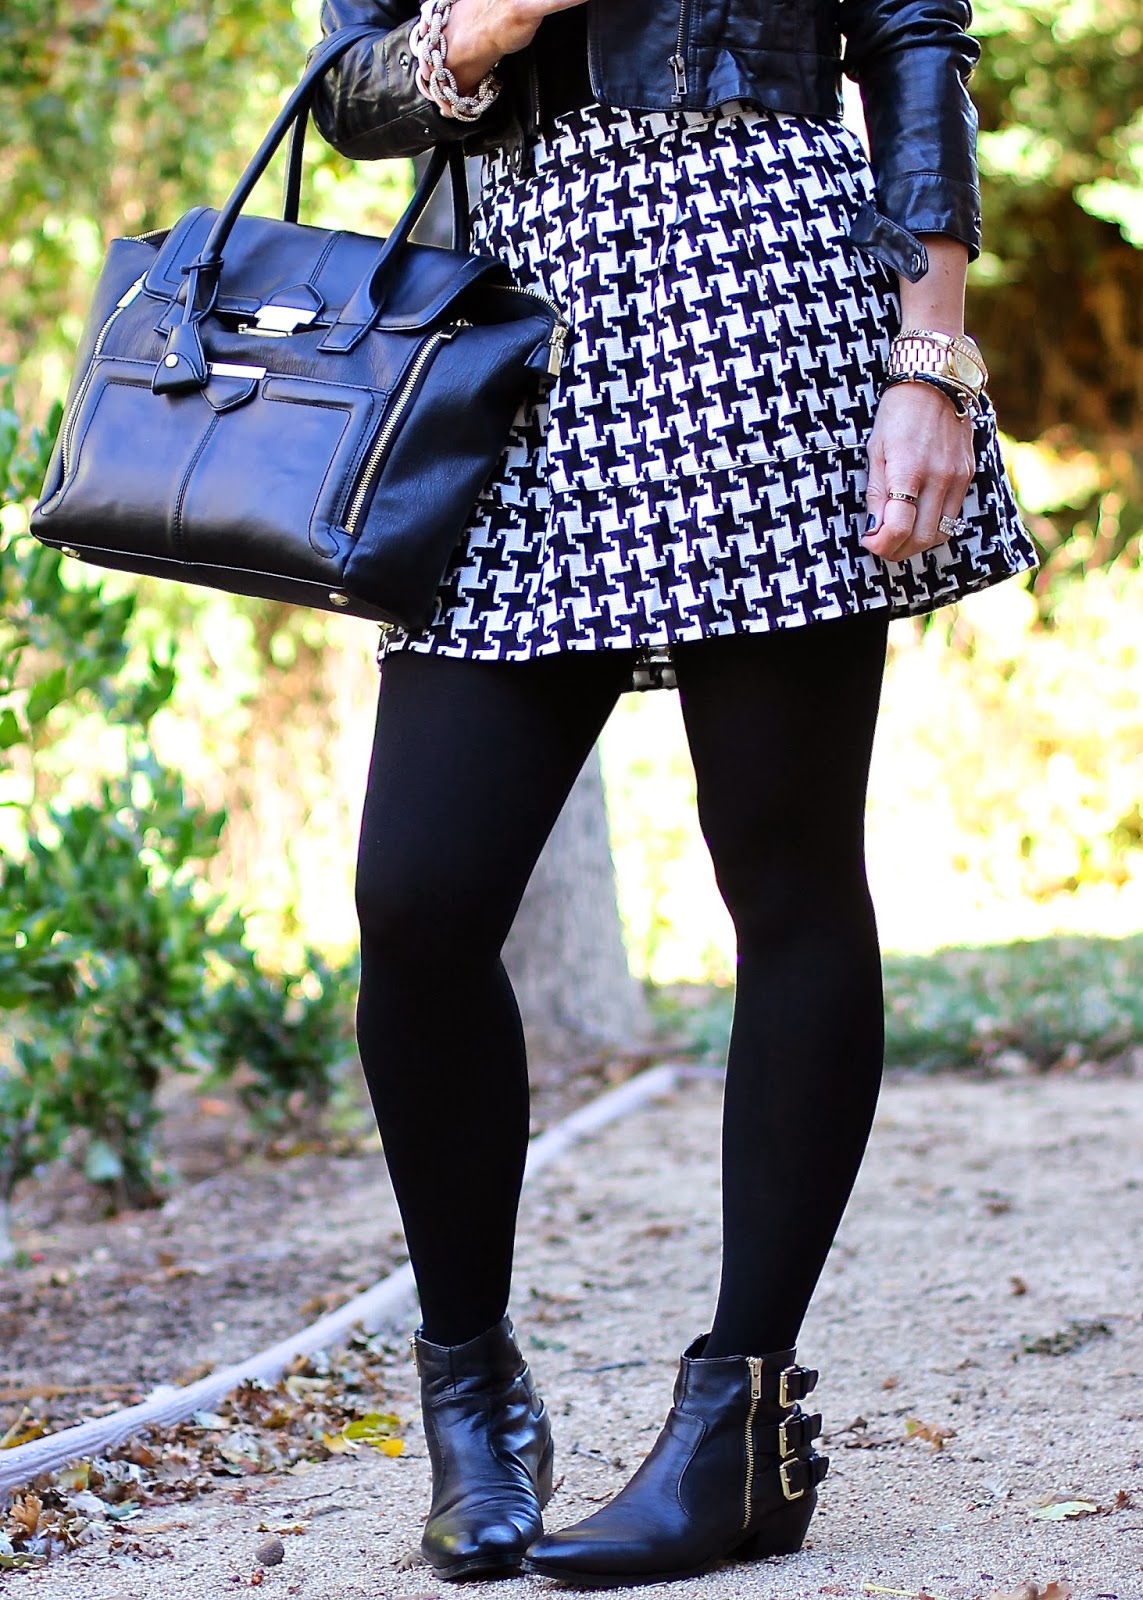 The Parlor Girl: Houndstooth...